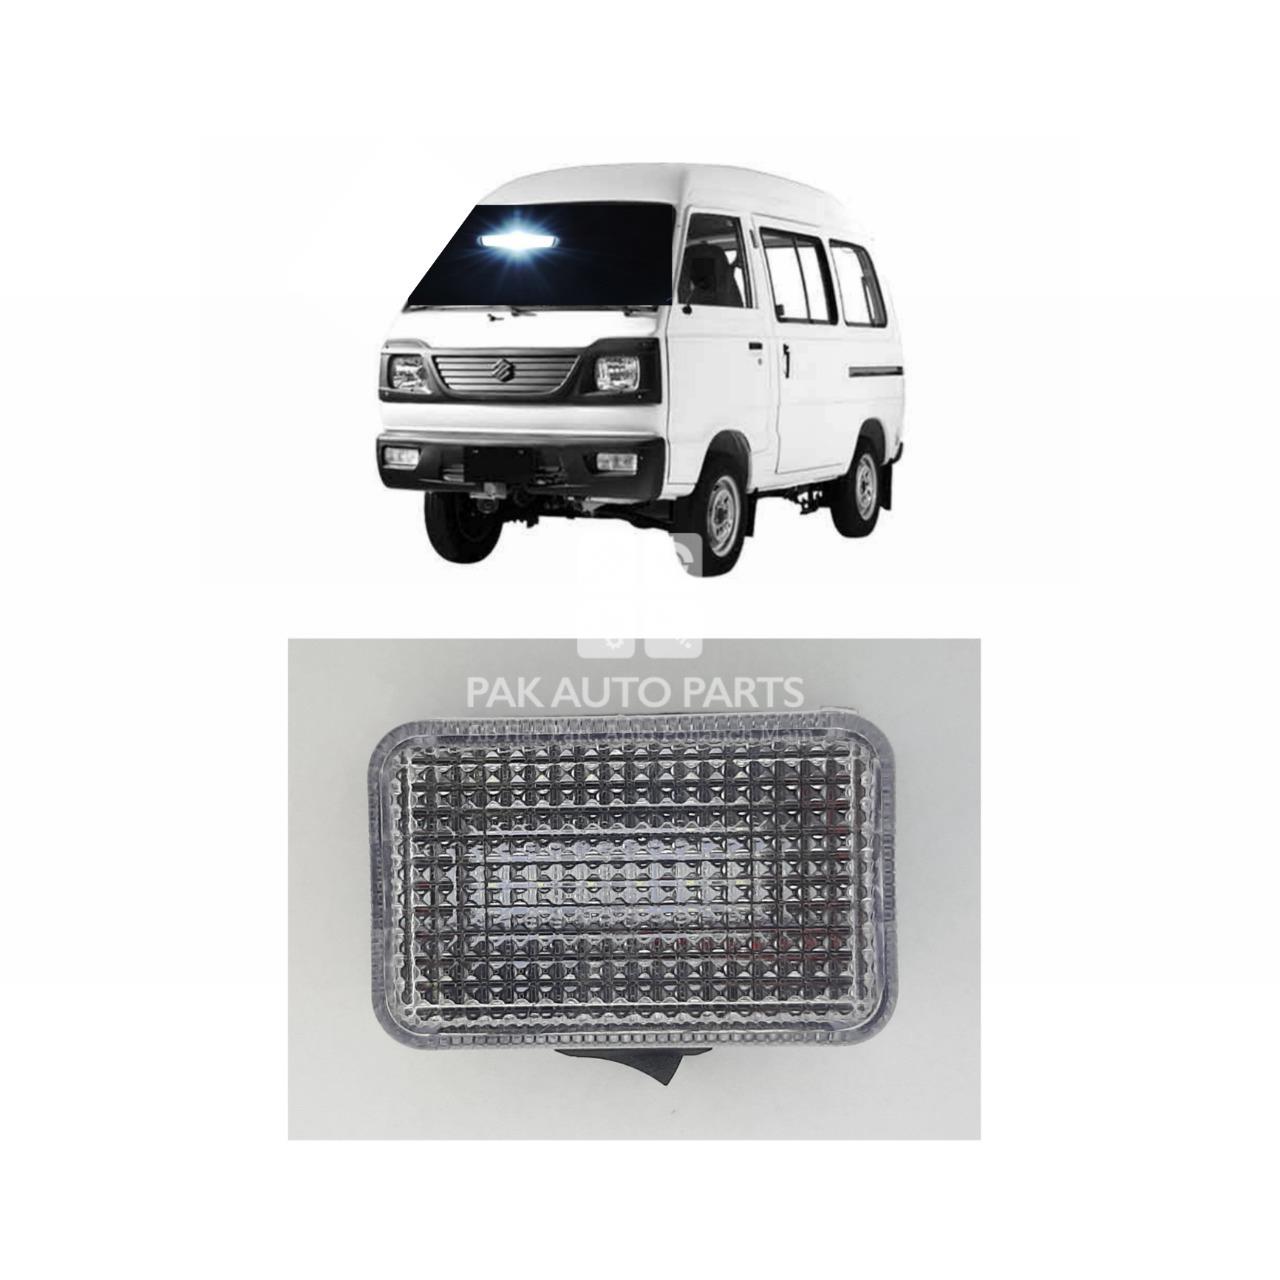 Picture of Suzuki Bolan Roof Light LED